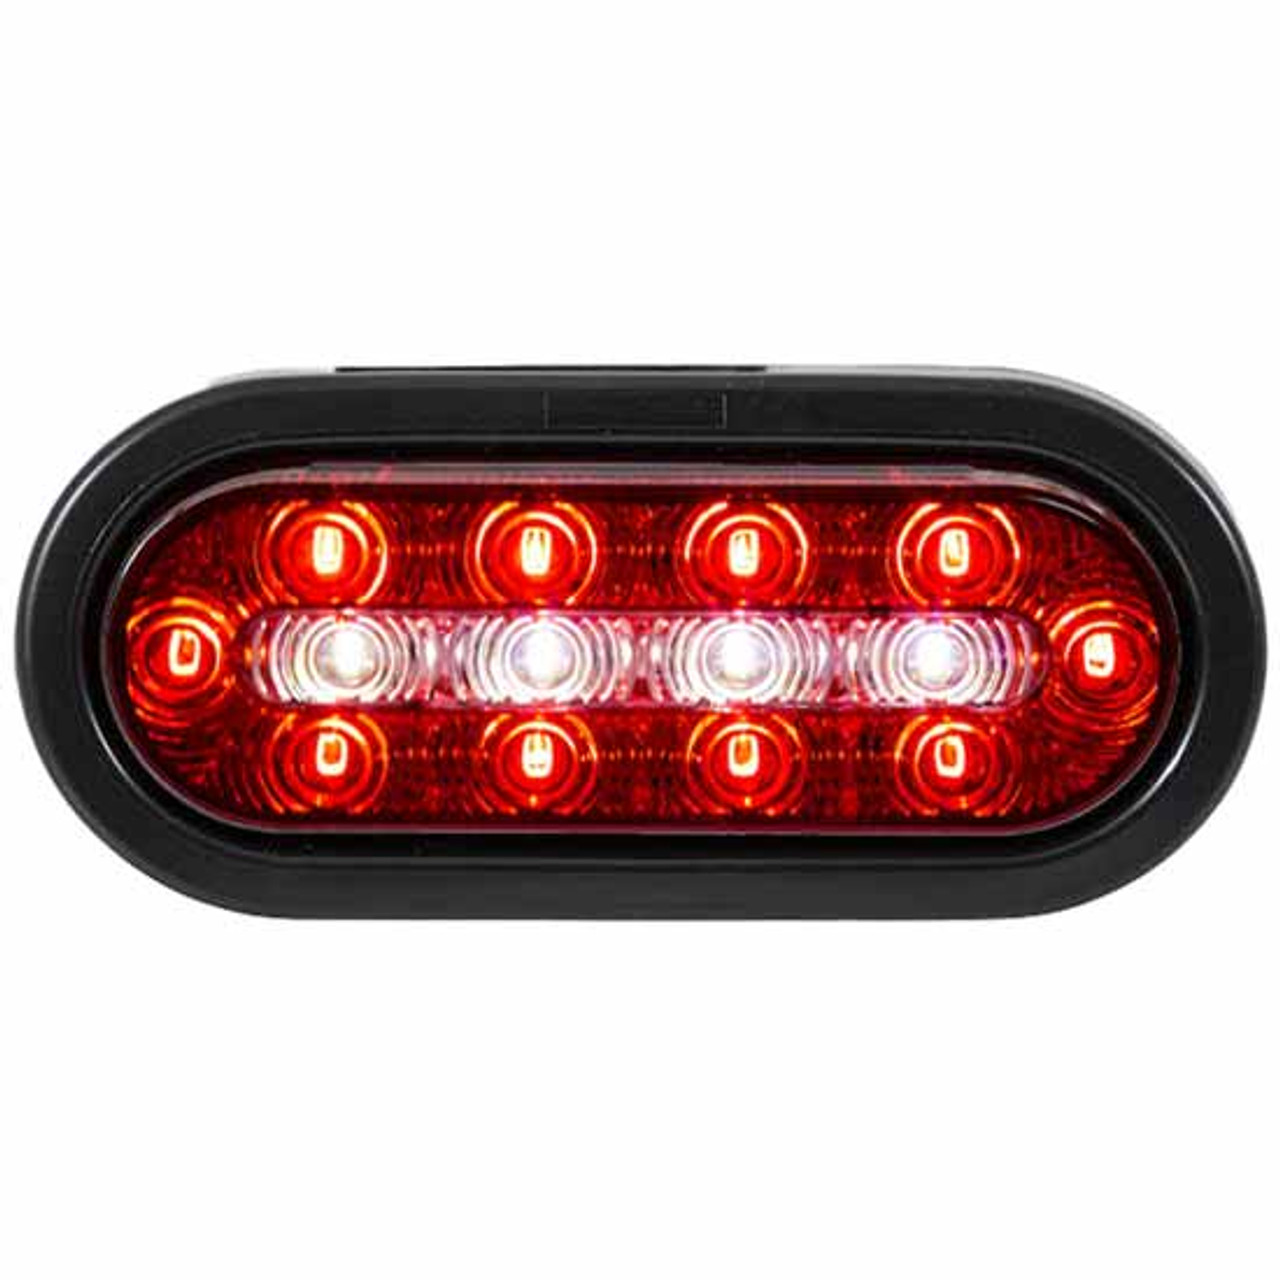 6 Inch Oval Red/Clear Combination Stop/Turn/Tail/Backup Light Kit